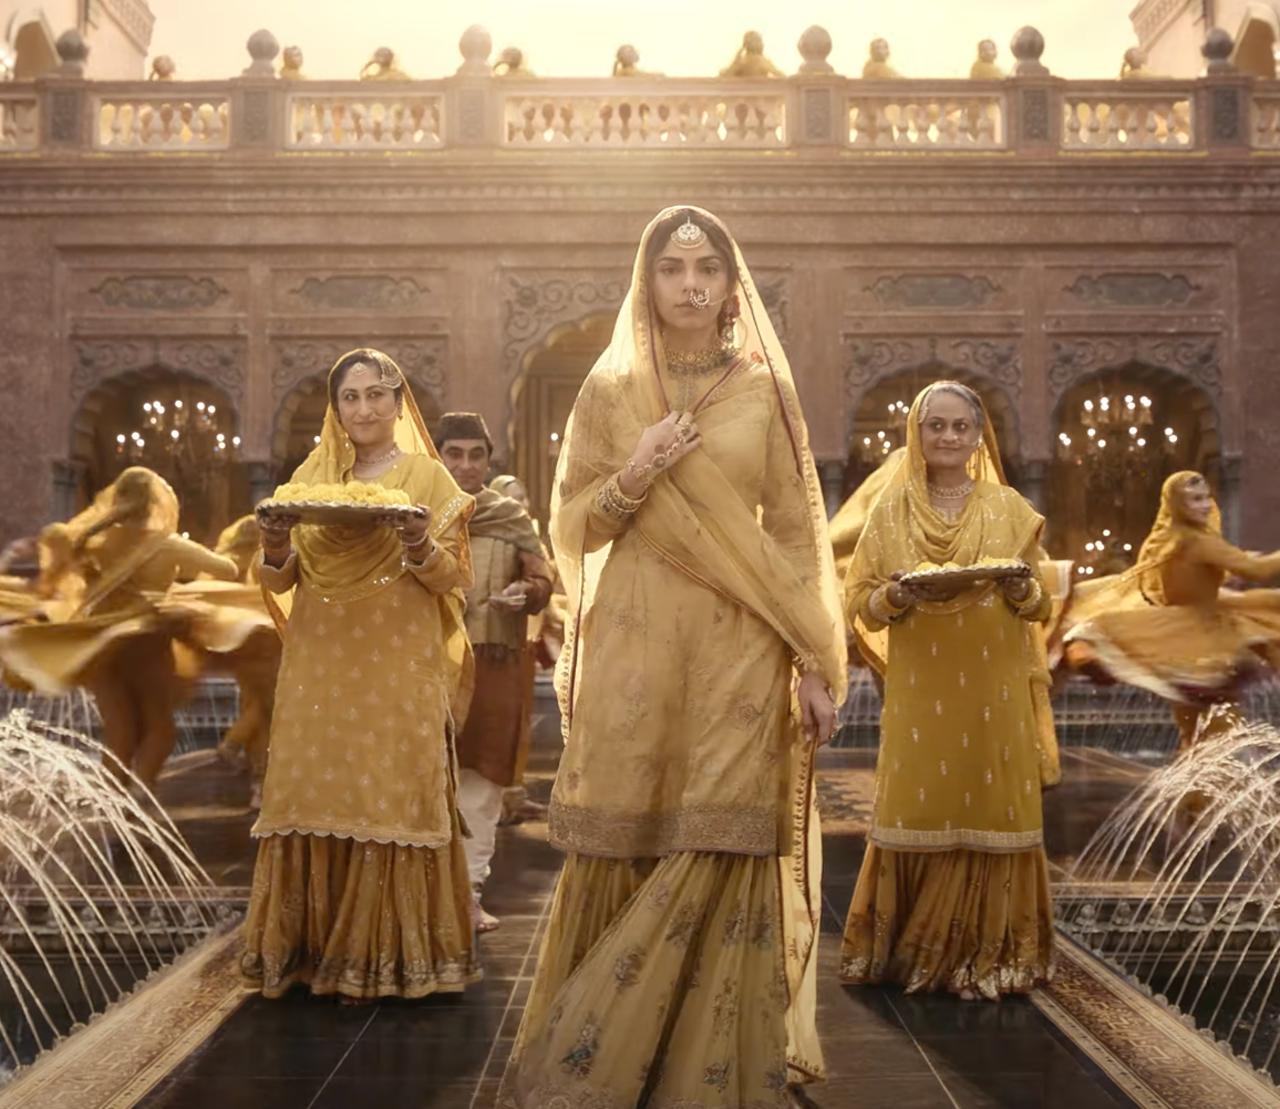 Colour Theory: True to Bhansali's signature style, 'Sakal Ban' is a visual feast that celebrates the vibrant hues of traditional Indian culture. From hues of mustard and yellow in costume design to intricately designed sets, every frame is a work of art that dazzles the senses